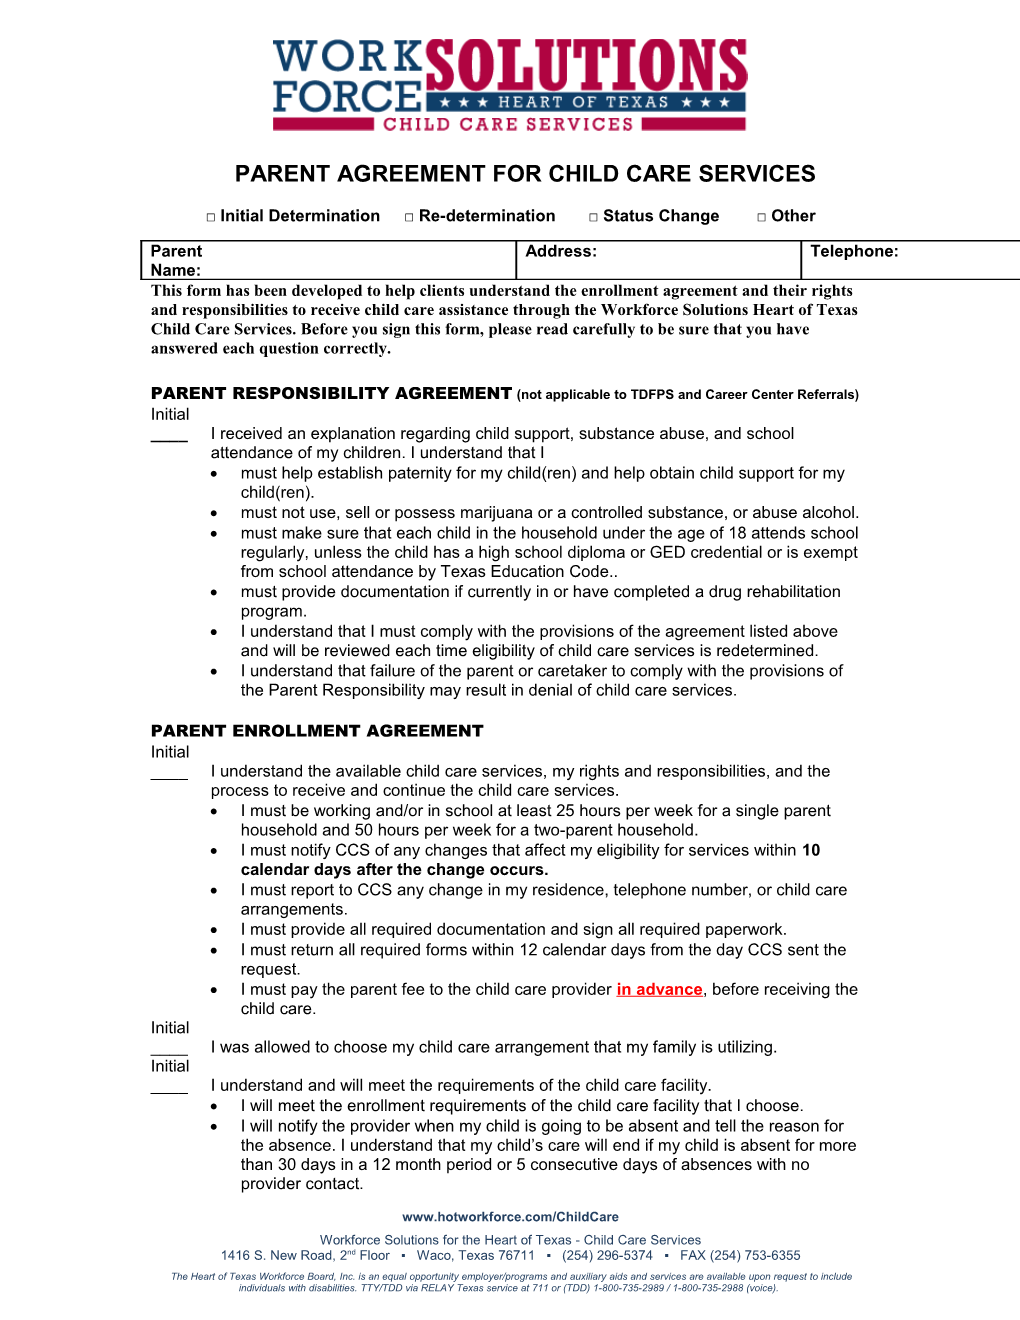 Parent Acknowlegement of Rights and Responsibilities for Child Care Services